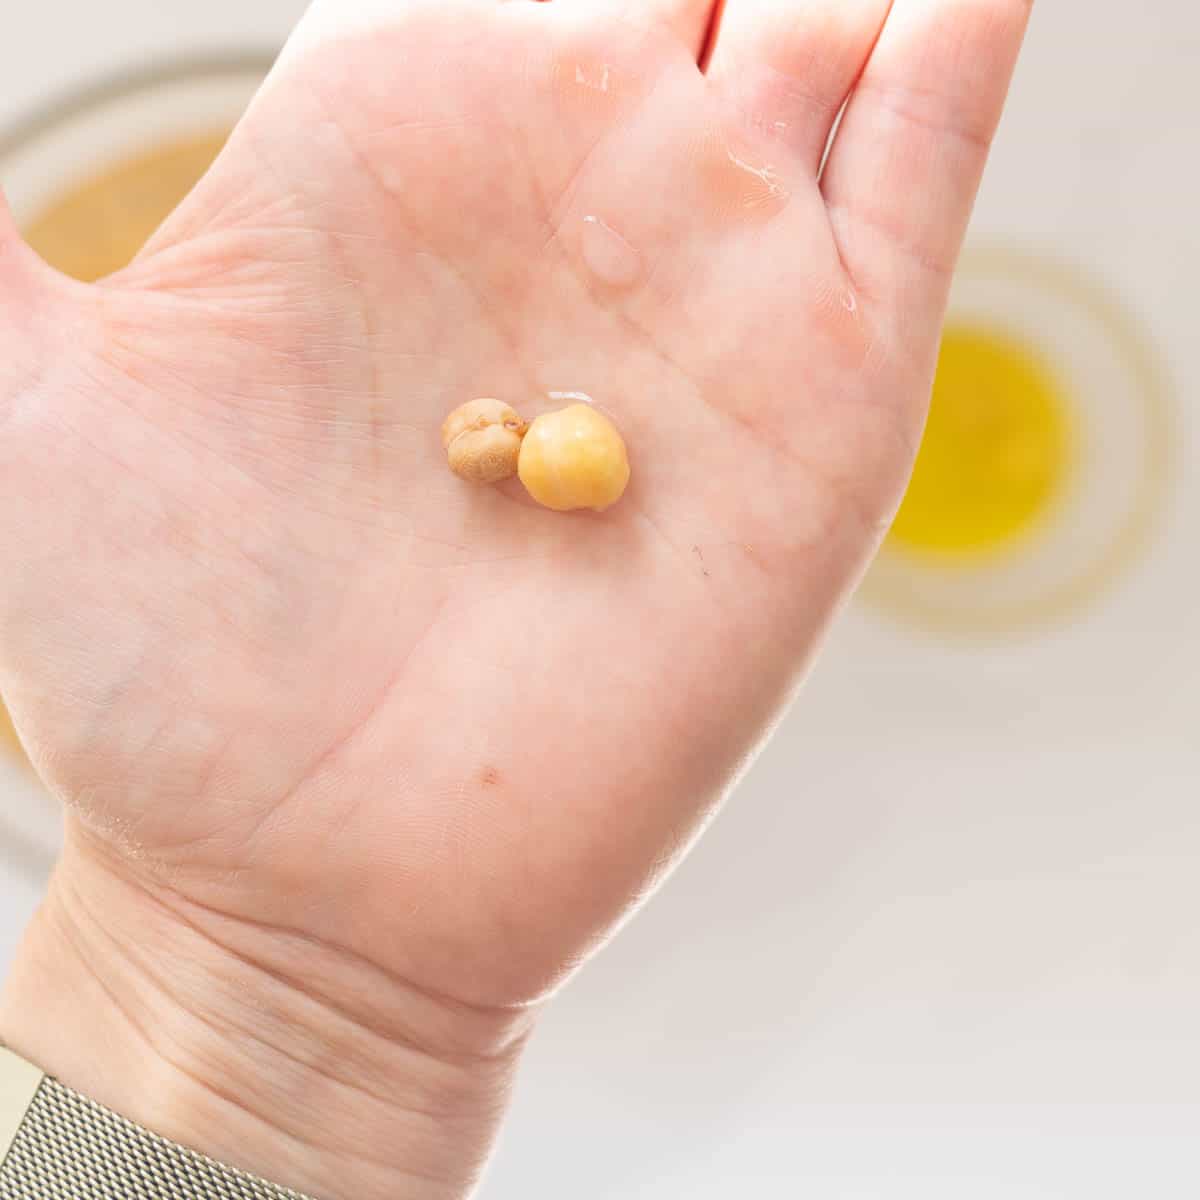 a dried chickpea sitting next to a soaked chickpea on the palm of a hand. 